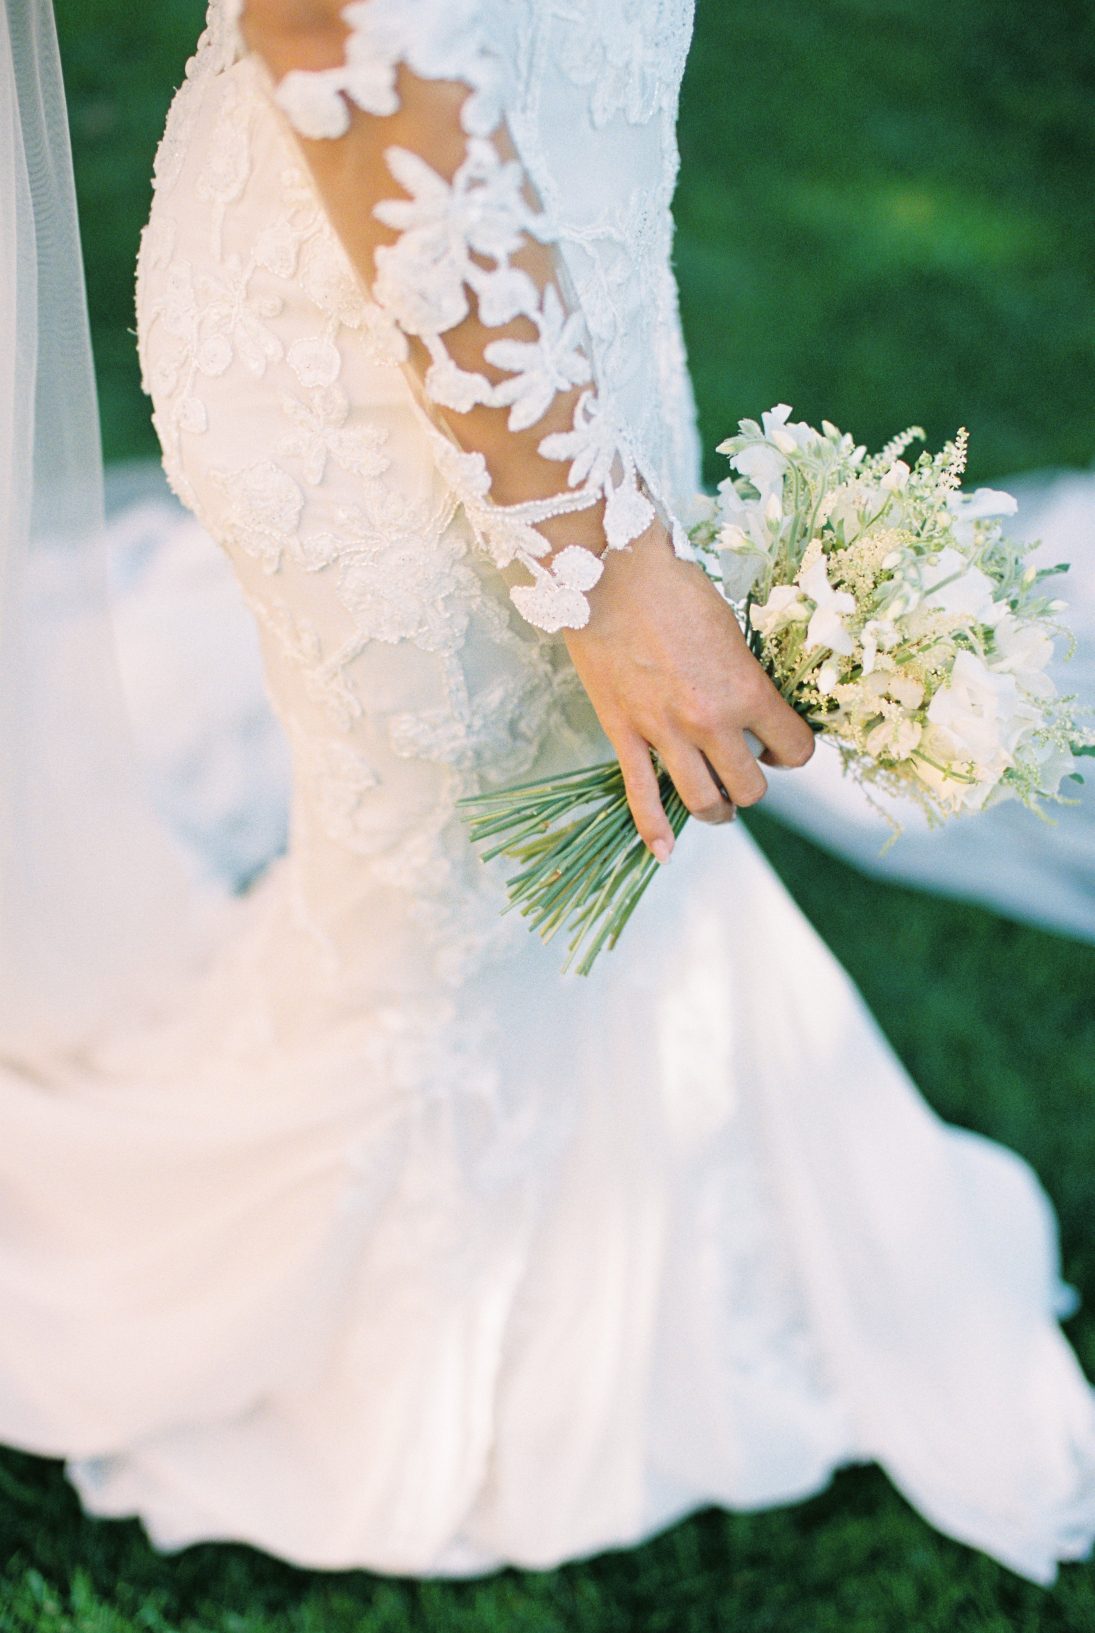 A close up of Stephanie's beautiful white posy bouquet, rich in texture with delicate blooms